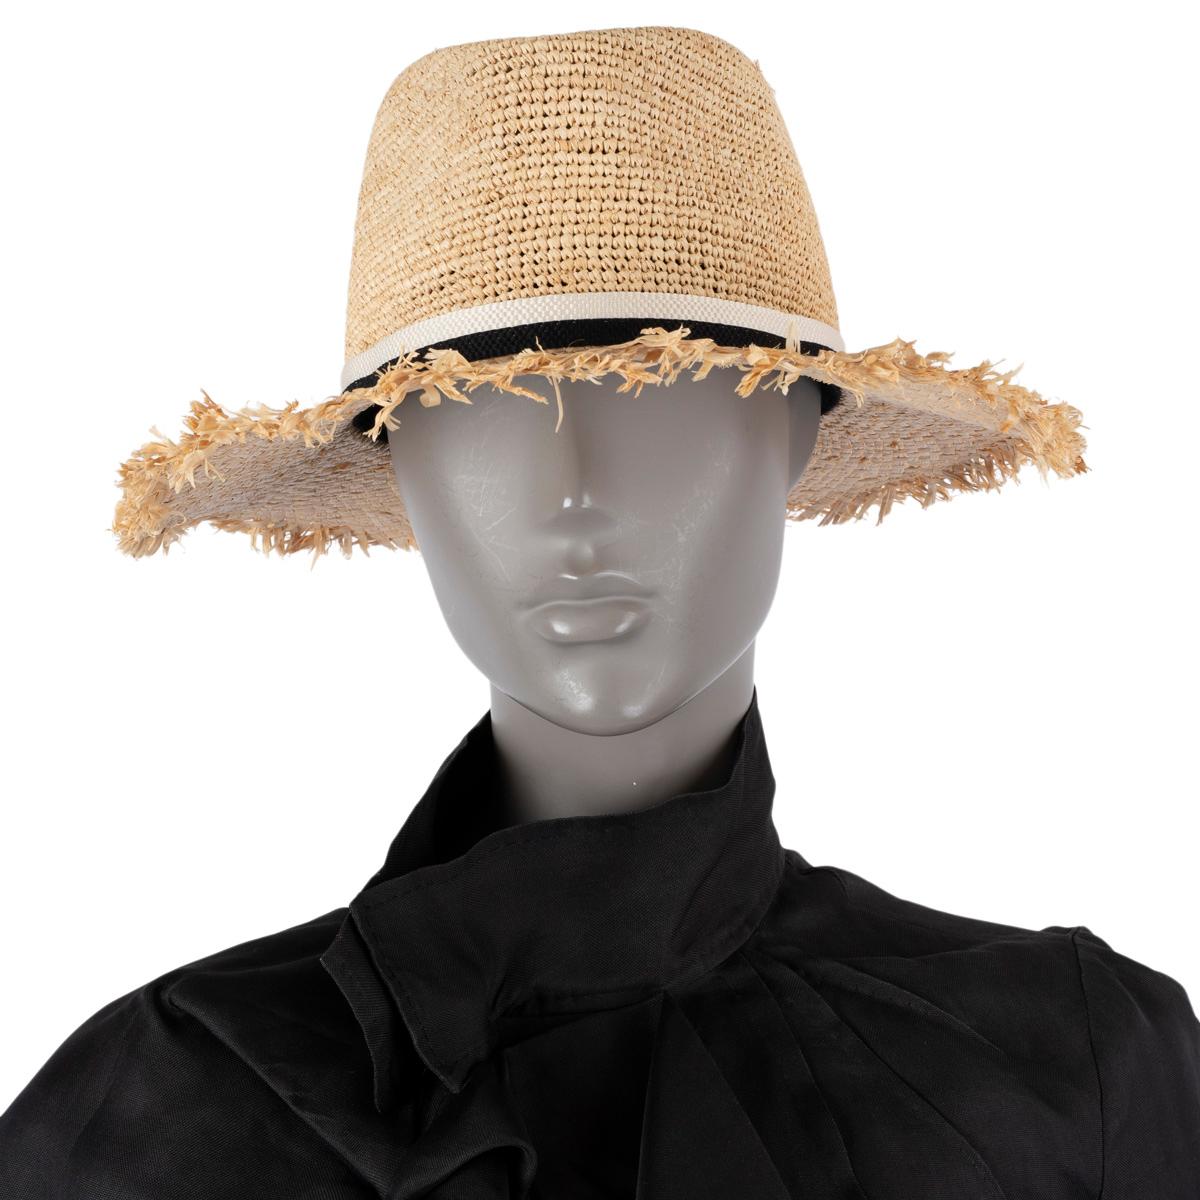 100% authentic Maison Michel fringe wide brim straw hat in beige raffia with a black & white band. Has been worn and is in virtually new condition.

Measurements
Tag Size	L
Inside Circumference	58cm (22.6in)

All our listings include only the listed